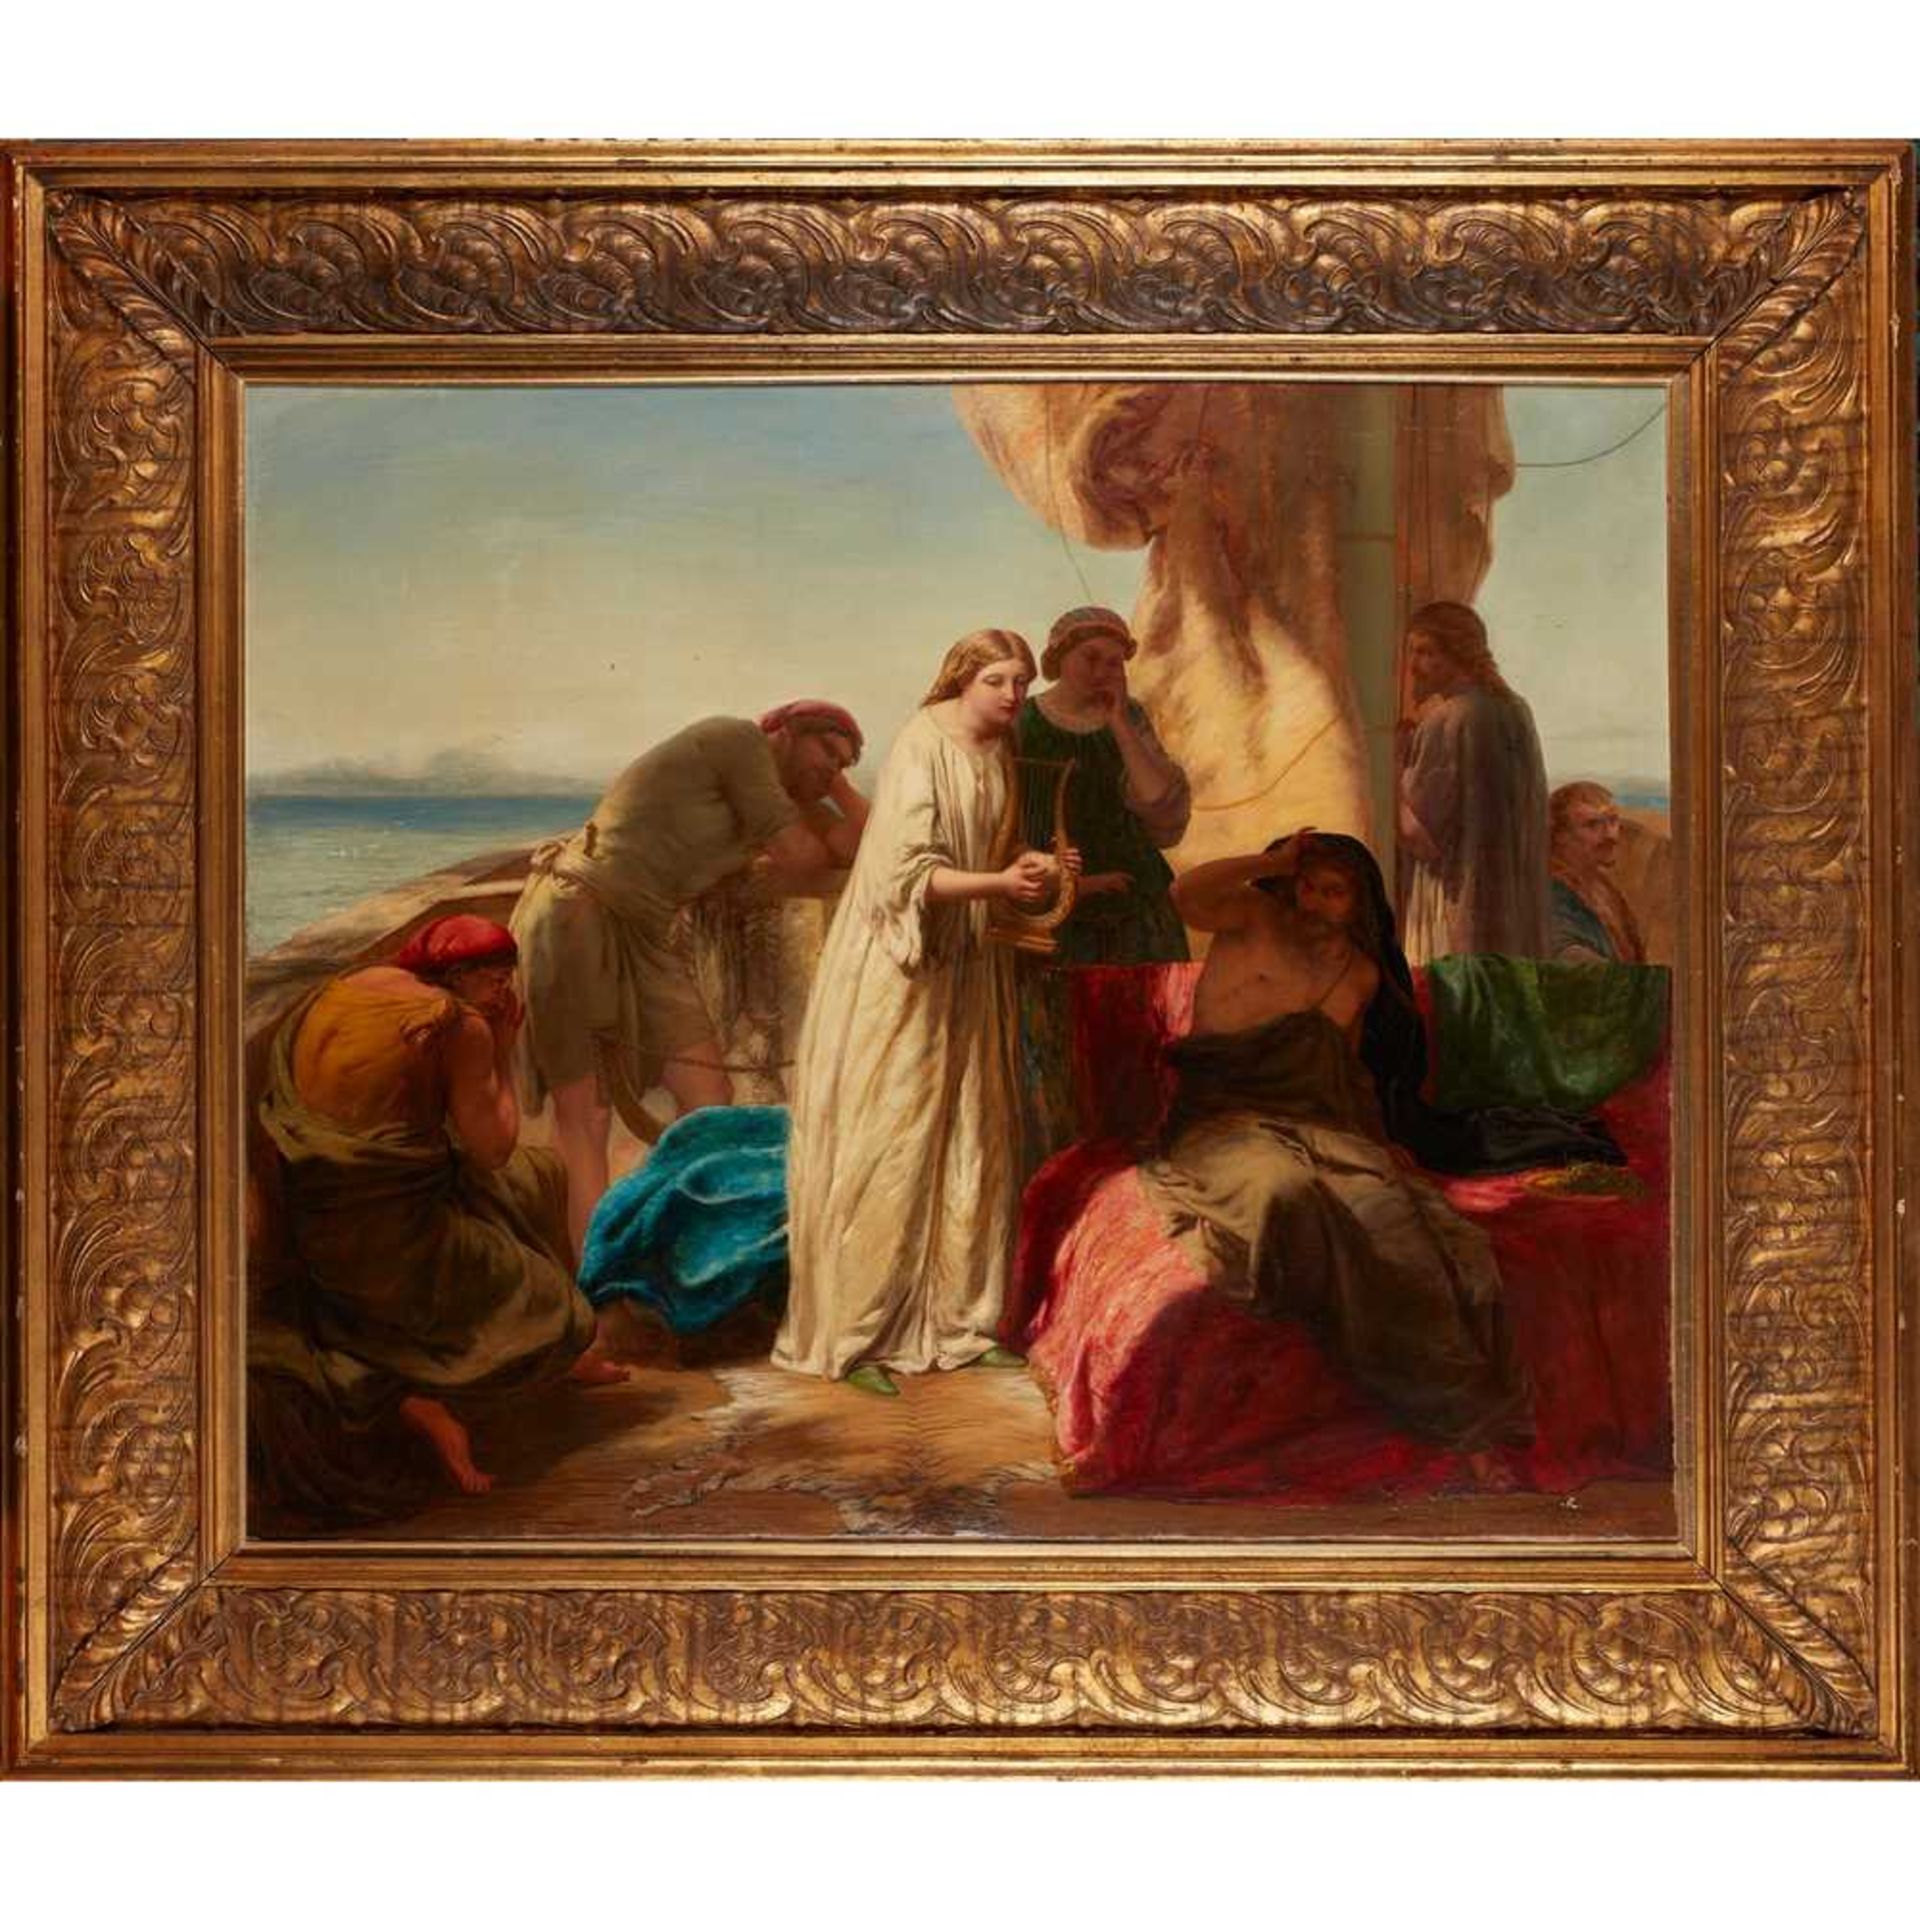 PAUL FALCONER POOLE R.A., R.I. (BRITISH 1807-1879) MARINA SINGING TO HER FATHER, PERICLES, ETC. - Image 2 of 3